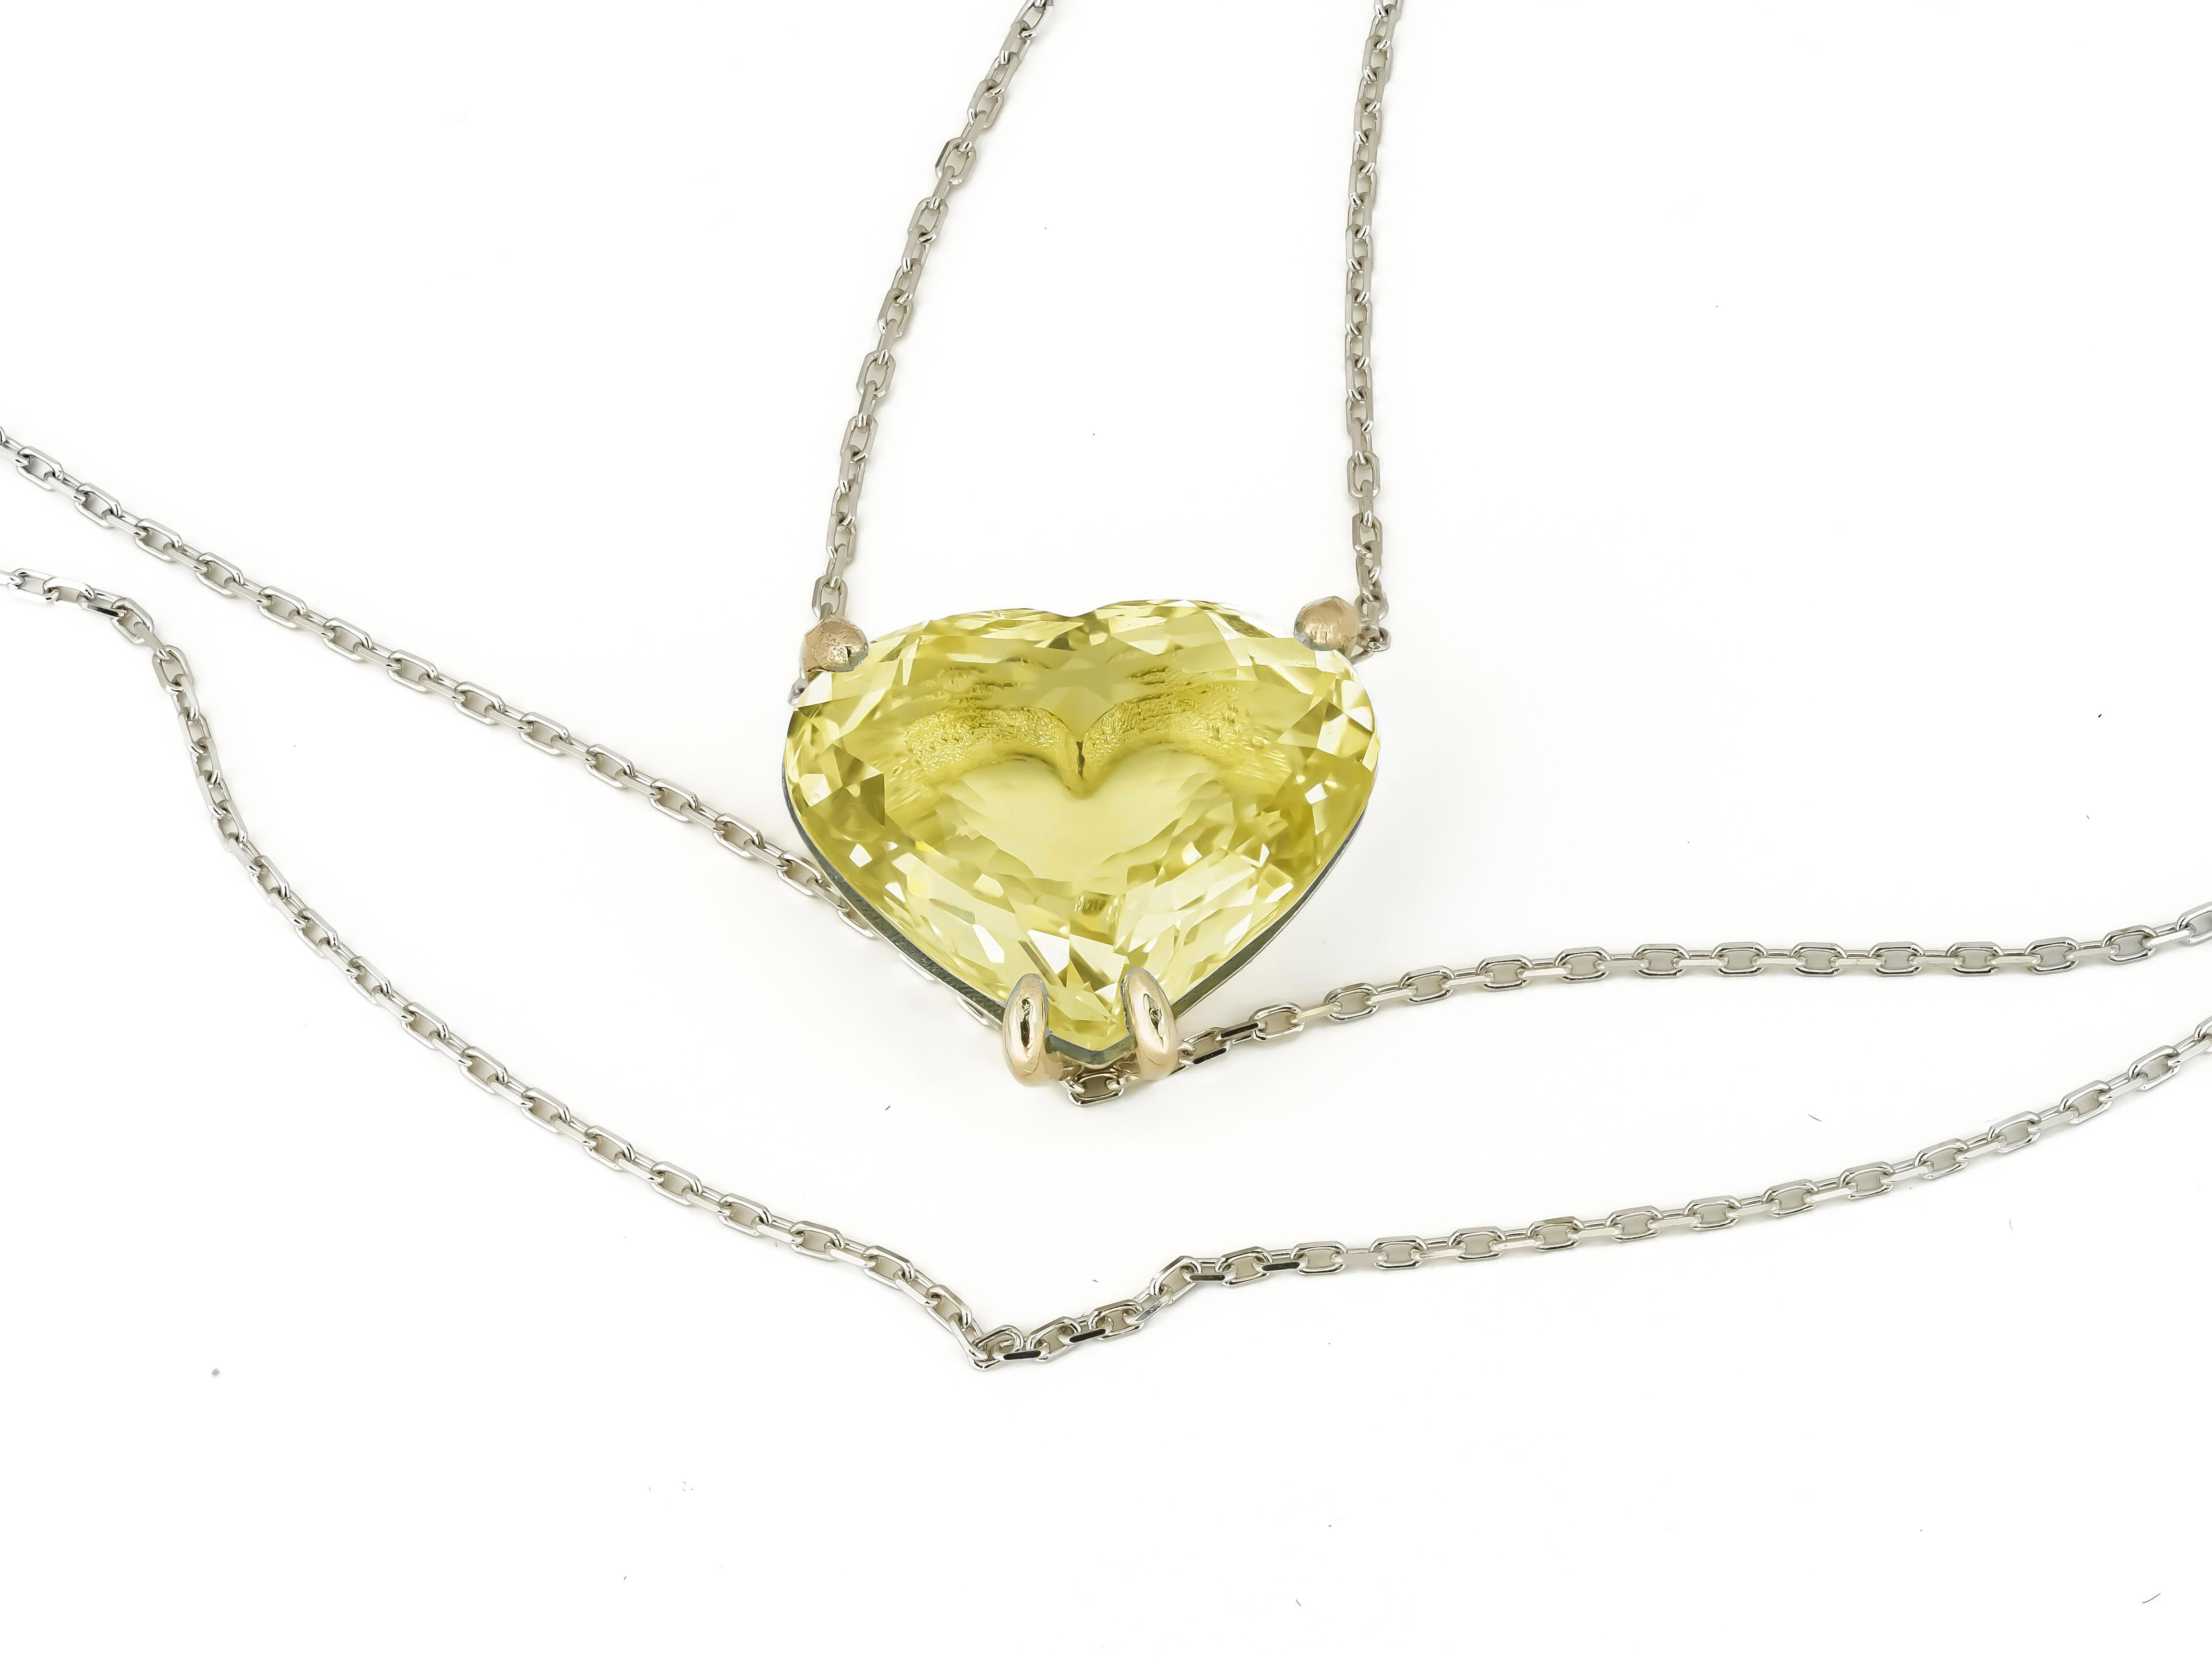 Heart Cut Heart shaped citrine pendant necklace in 14k gold.  For Sale